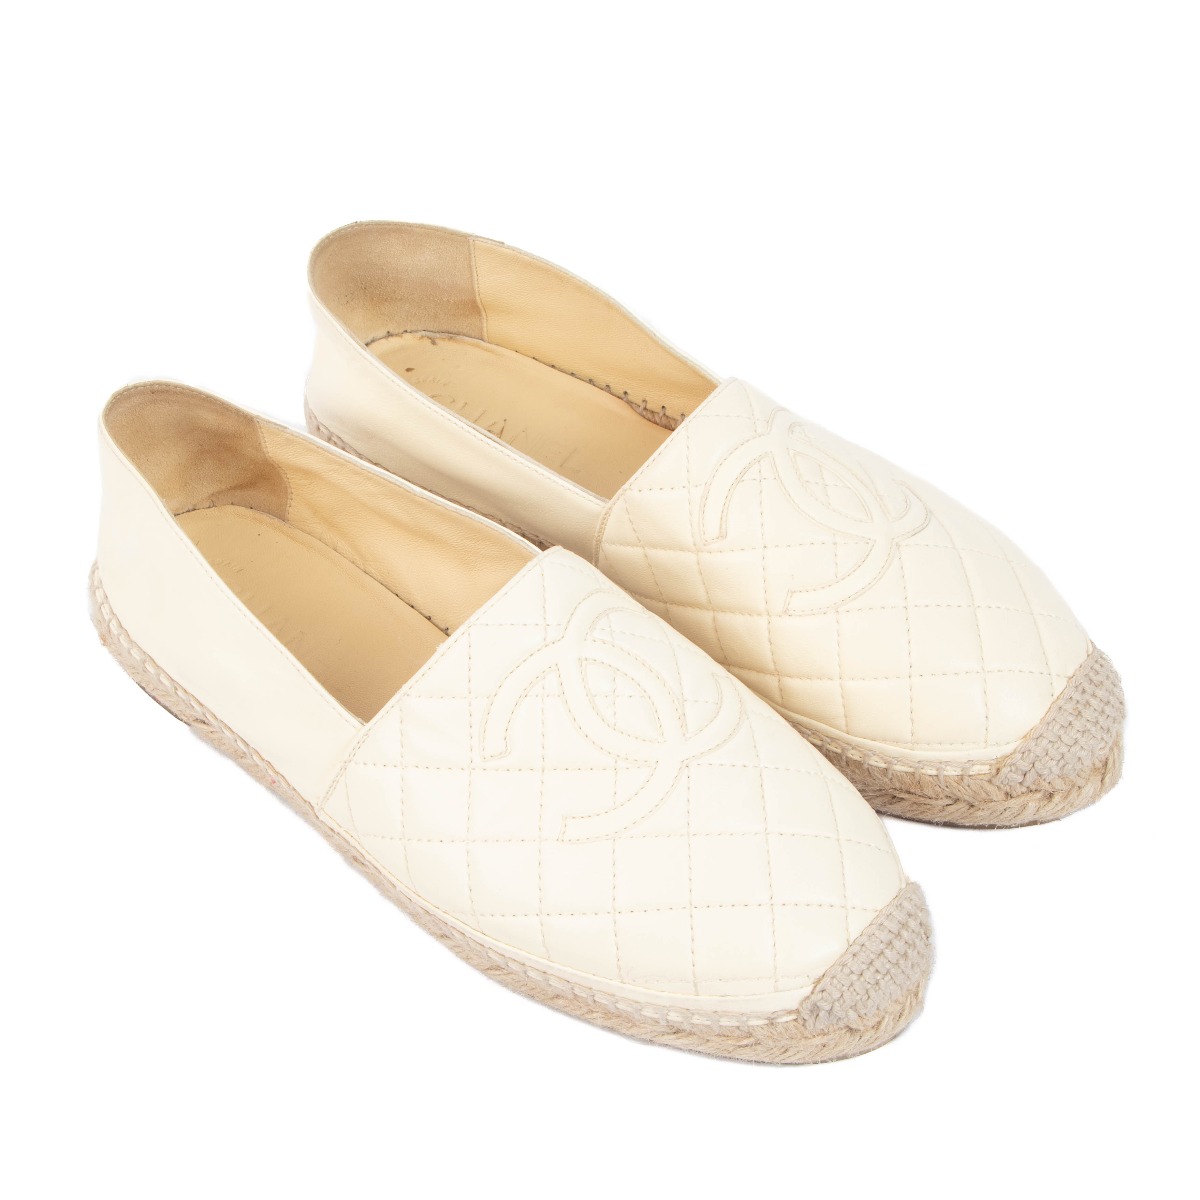 Chanel Cream Quilted Leather CC Espadrilles Flats - Size 39